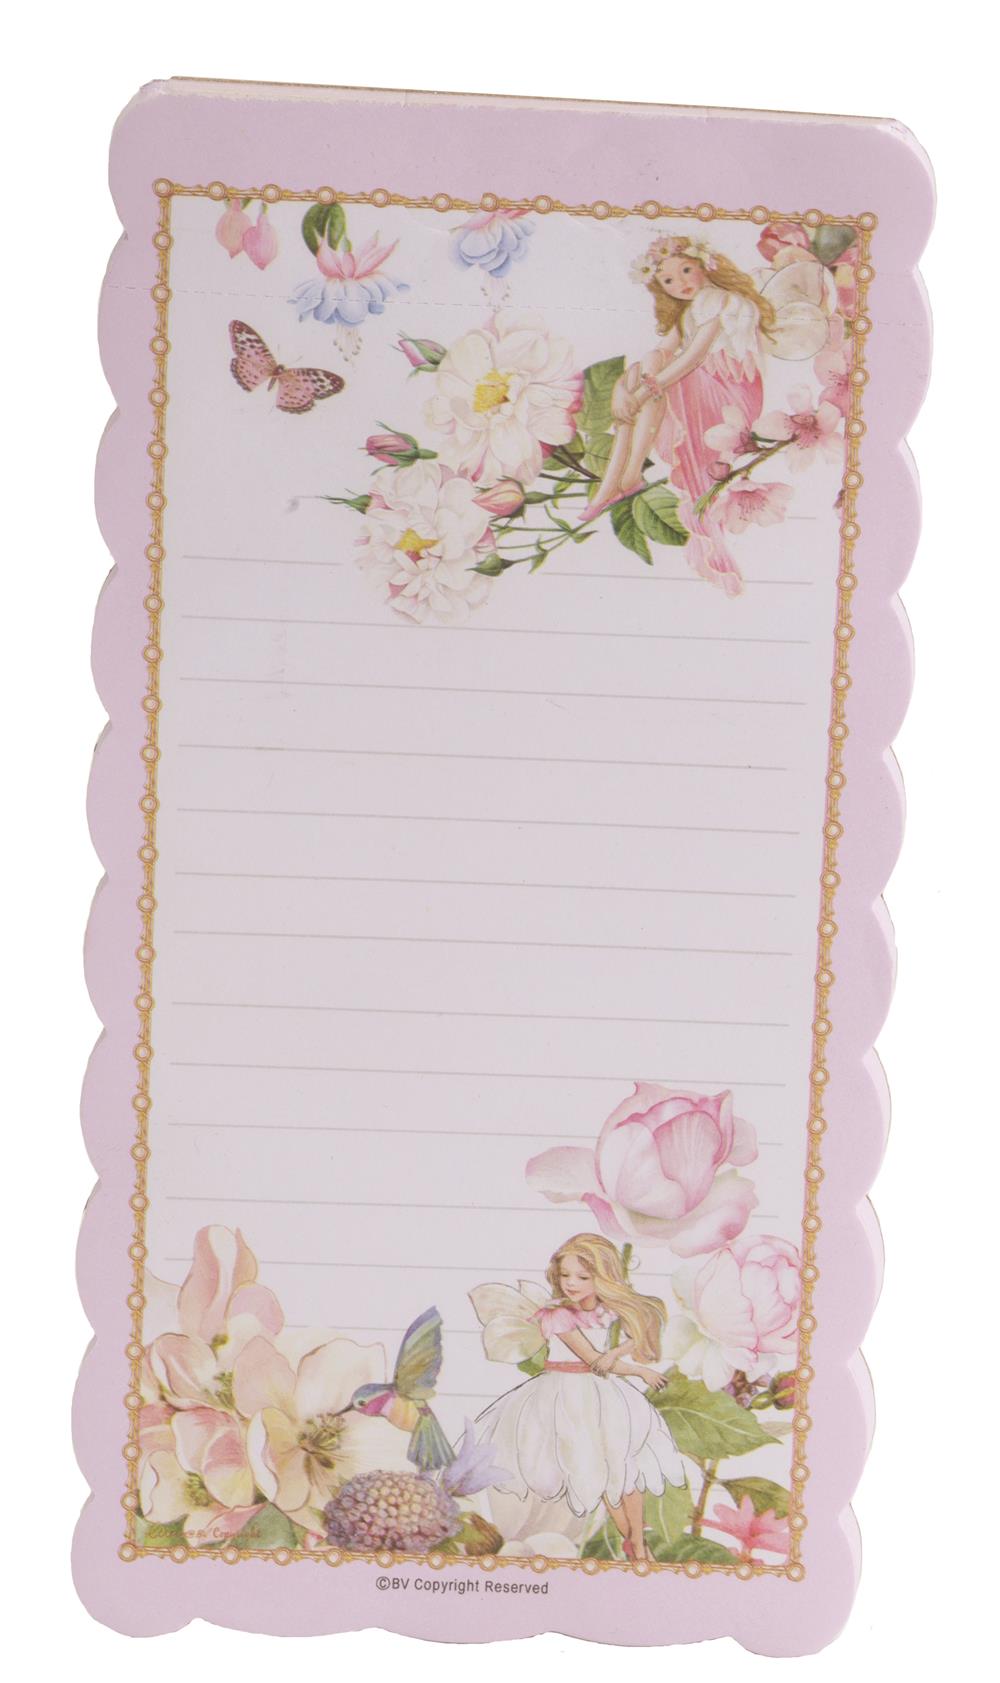 Fairy design Notepad 4 Pack